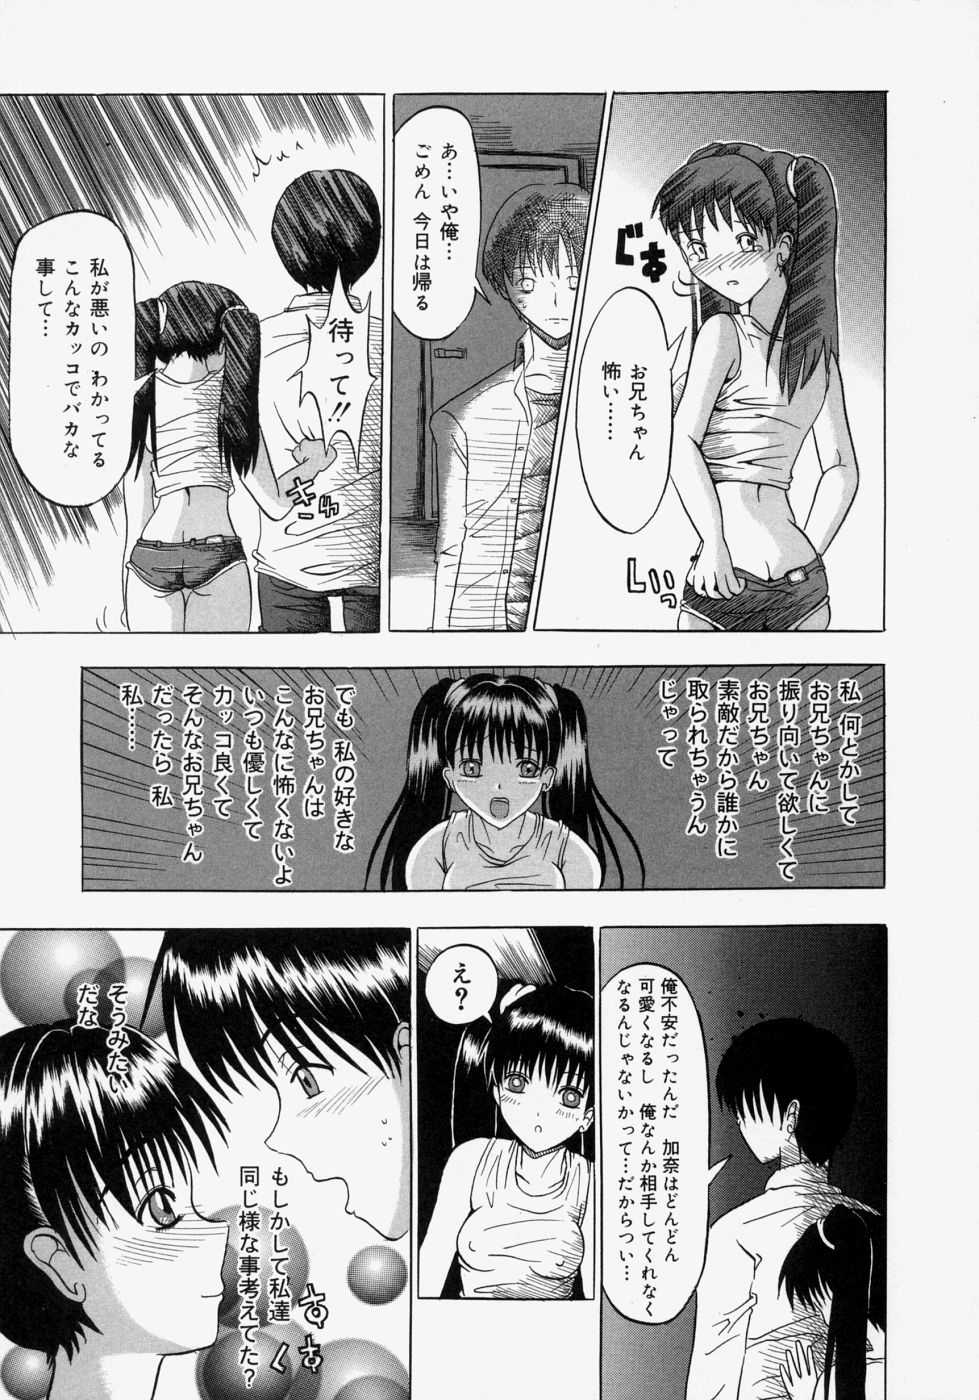 [Yajima Index] The face and reverse side 